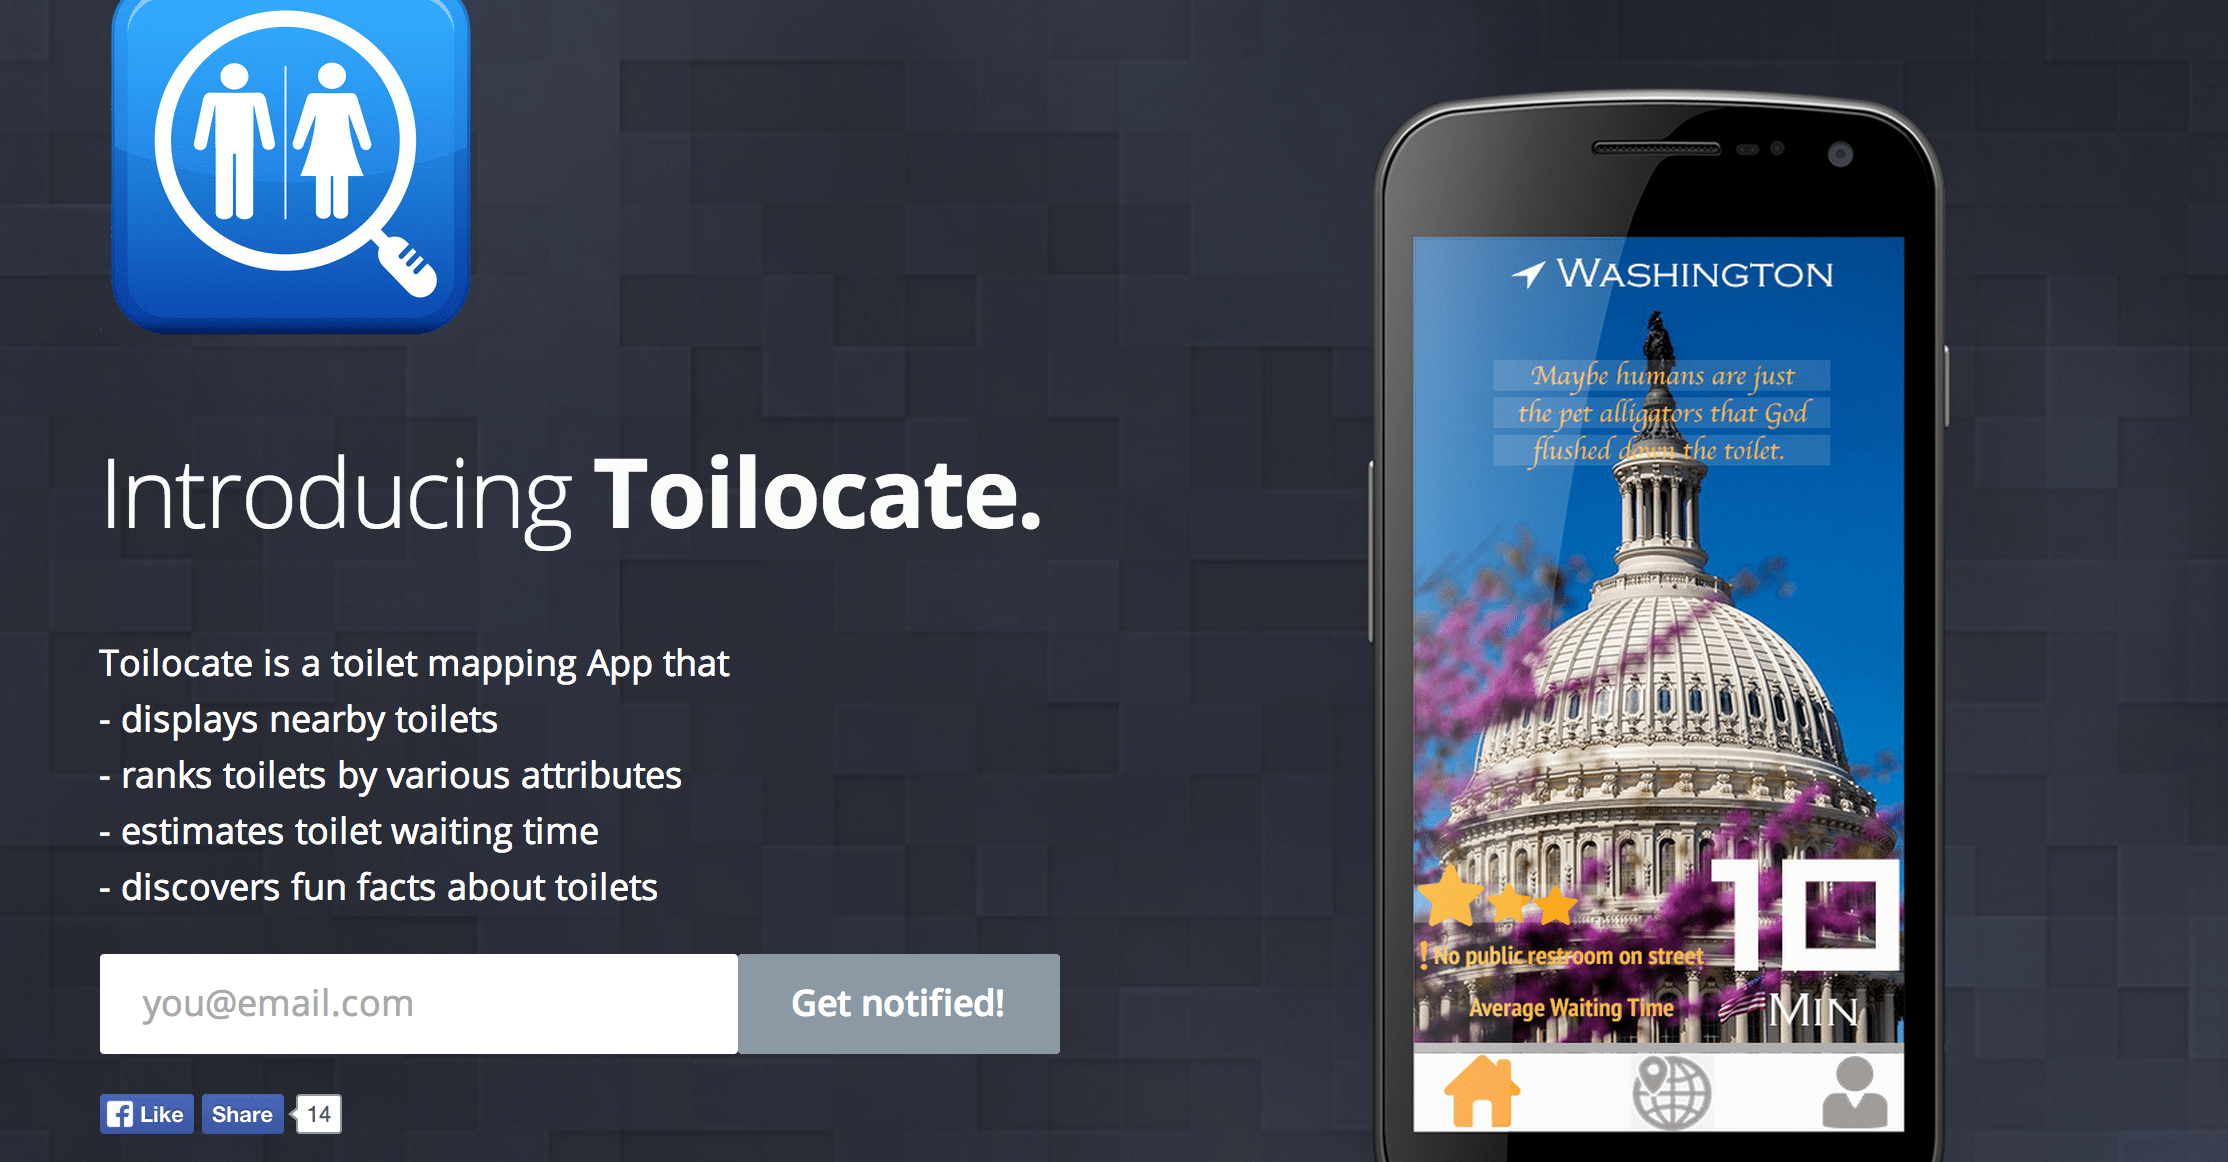 Toilocate helps you locate toilets in a city, and also lets users rate the quality of the restrooms.